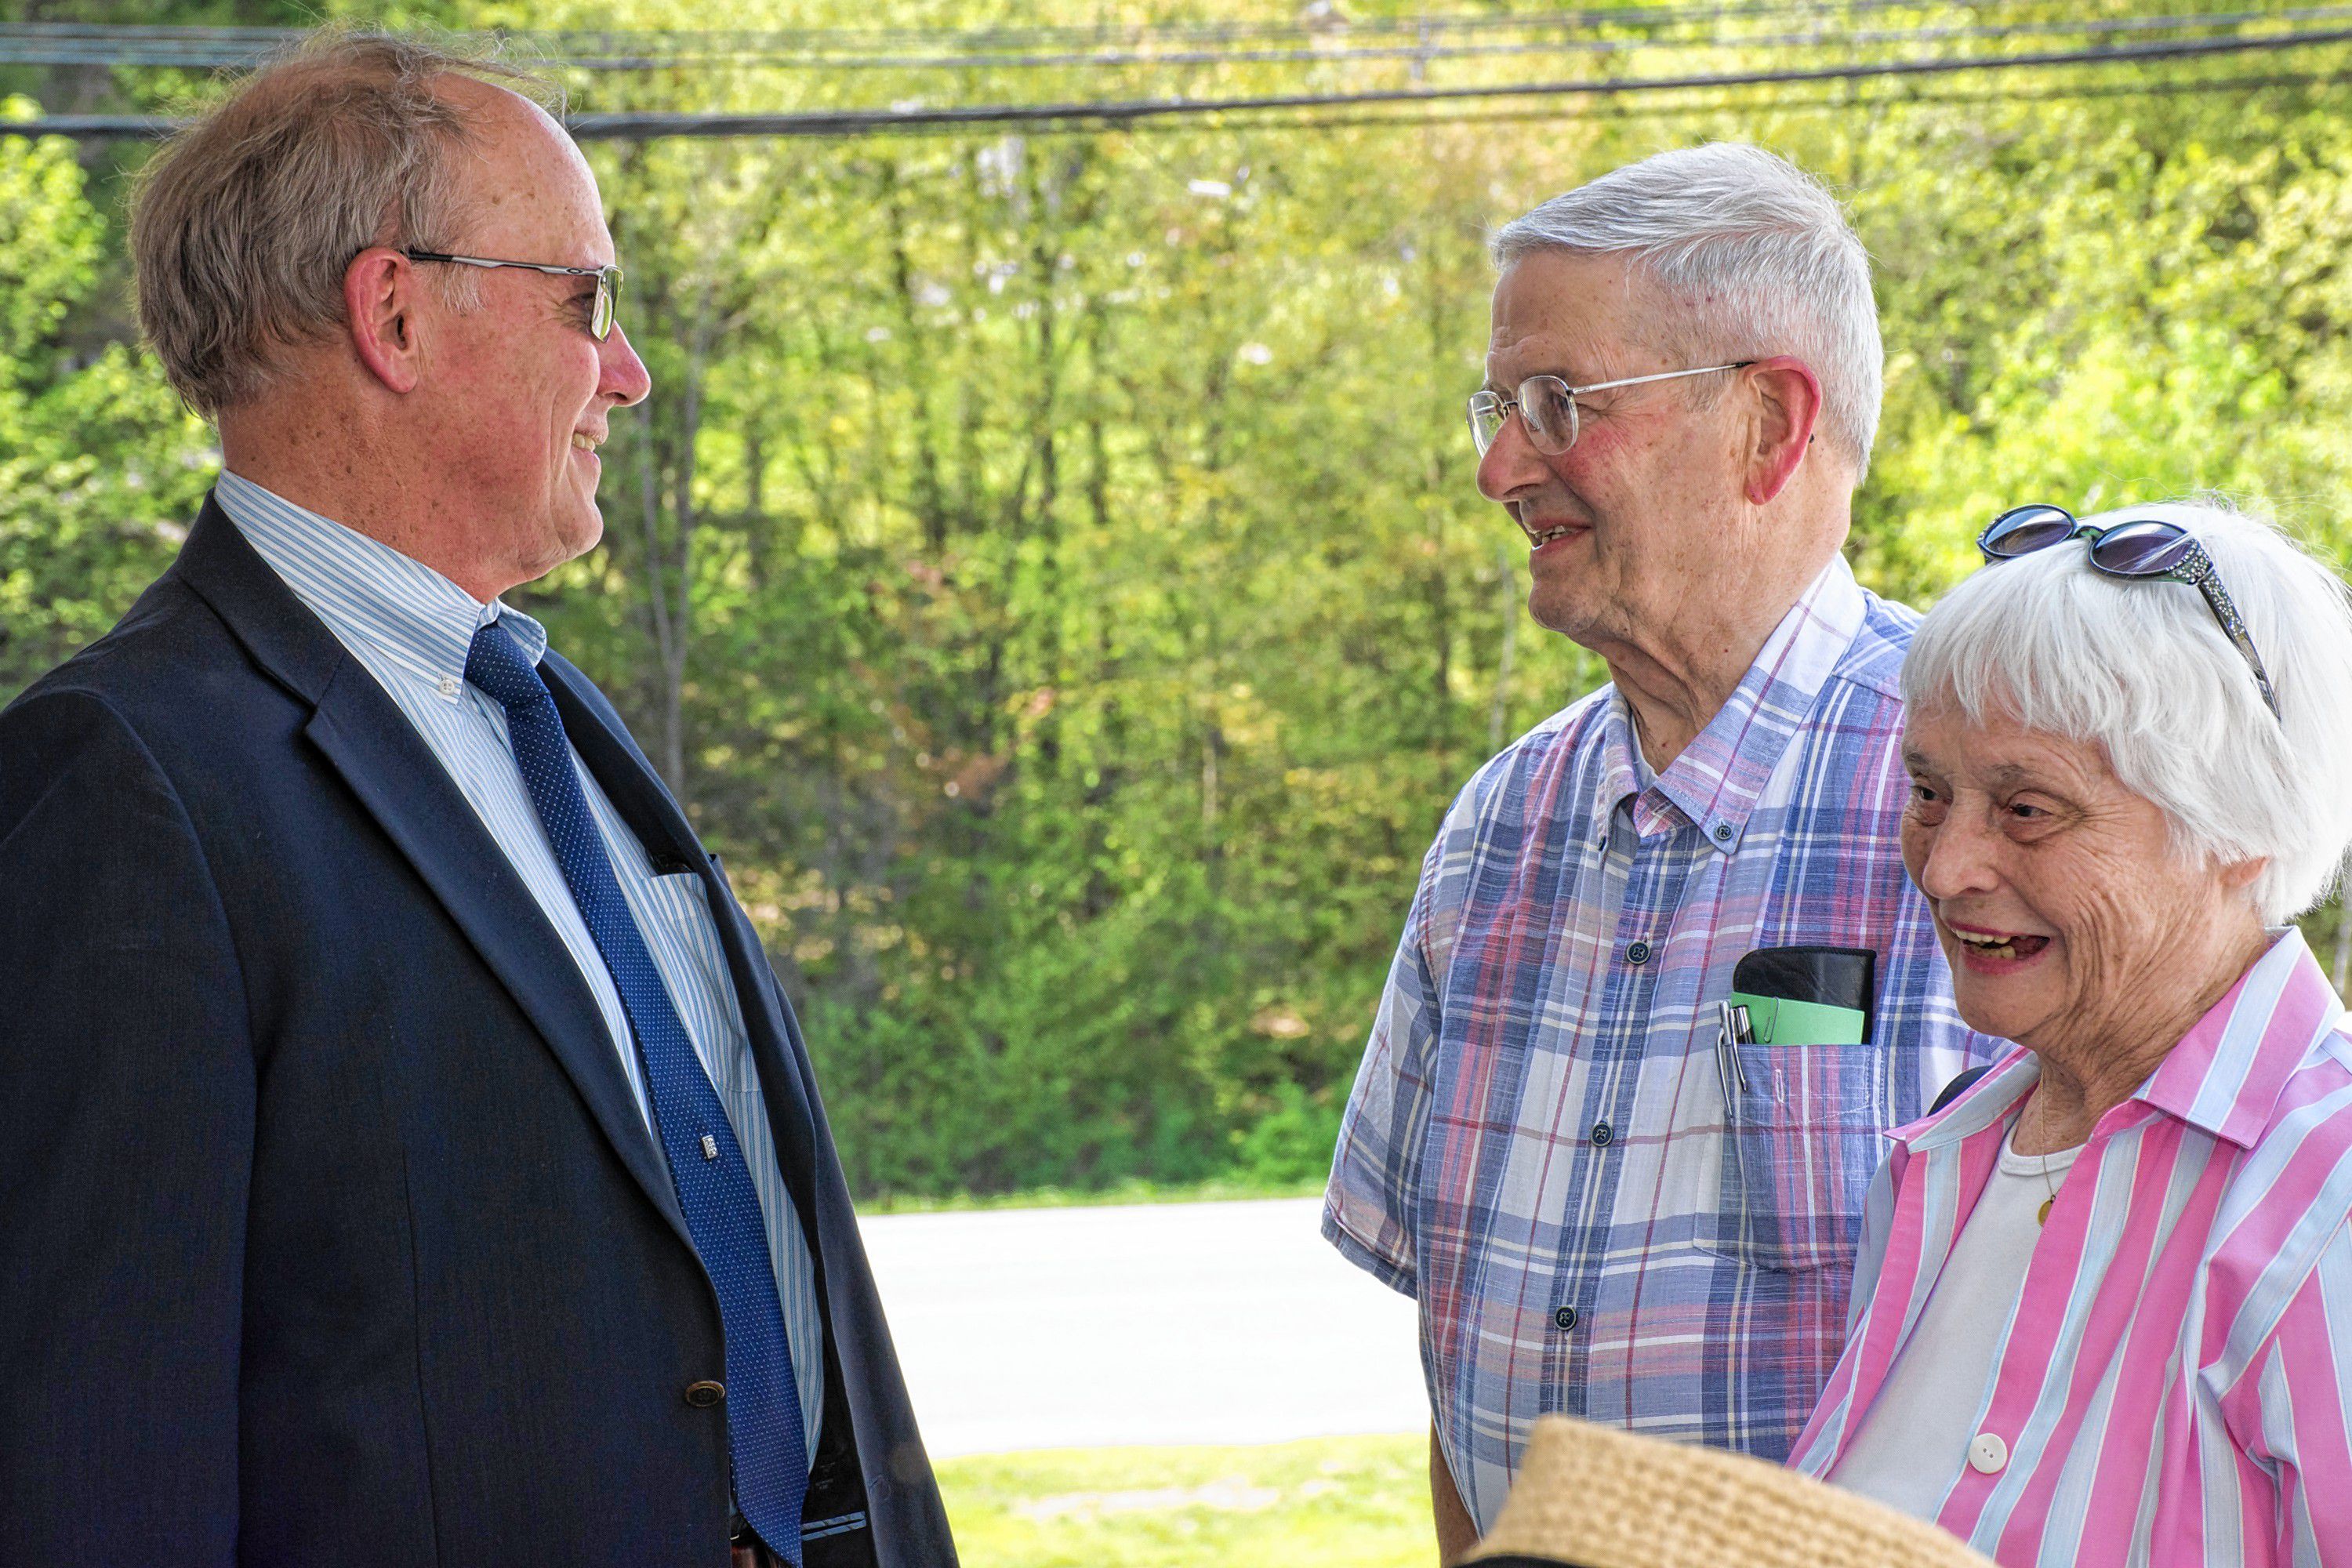 Trumbull-Nelson Construction Co. Executive Vice President Ron Bauer, left, speaks with Jack and Jane DeGange at the company's 100th anniversary celebration in Hanover, N.H., on May 18, 2017. Bauer has been with the company since 1981. Jane DeGange is the former director of David's House, built by Trumbull-Nelson. (Nancy Nutile-McMenemy photograph)